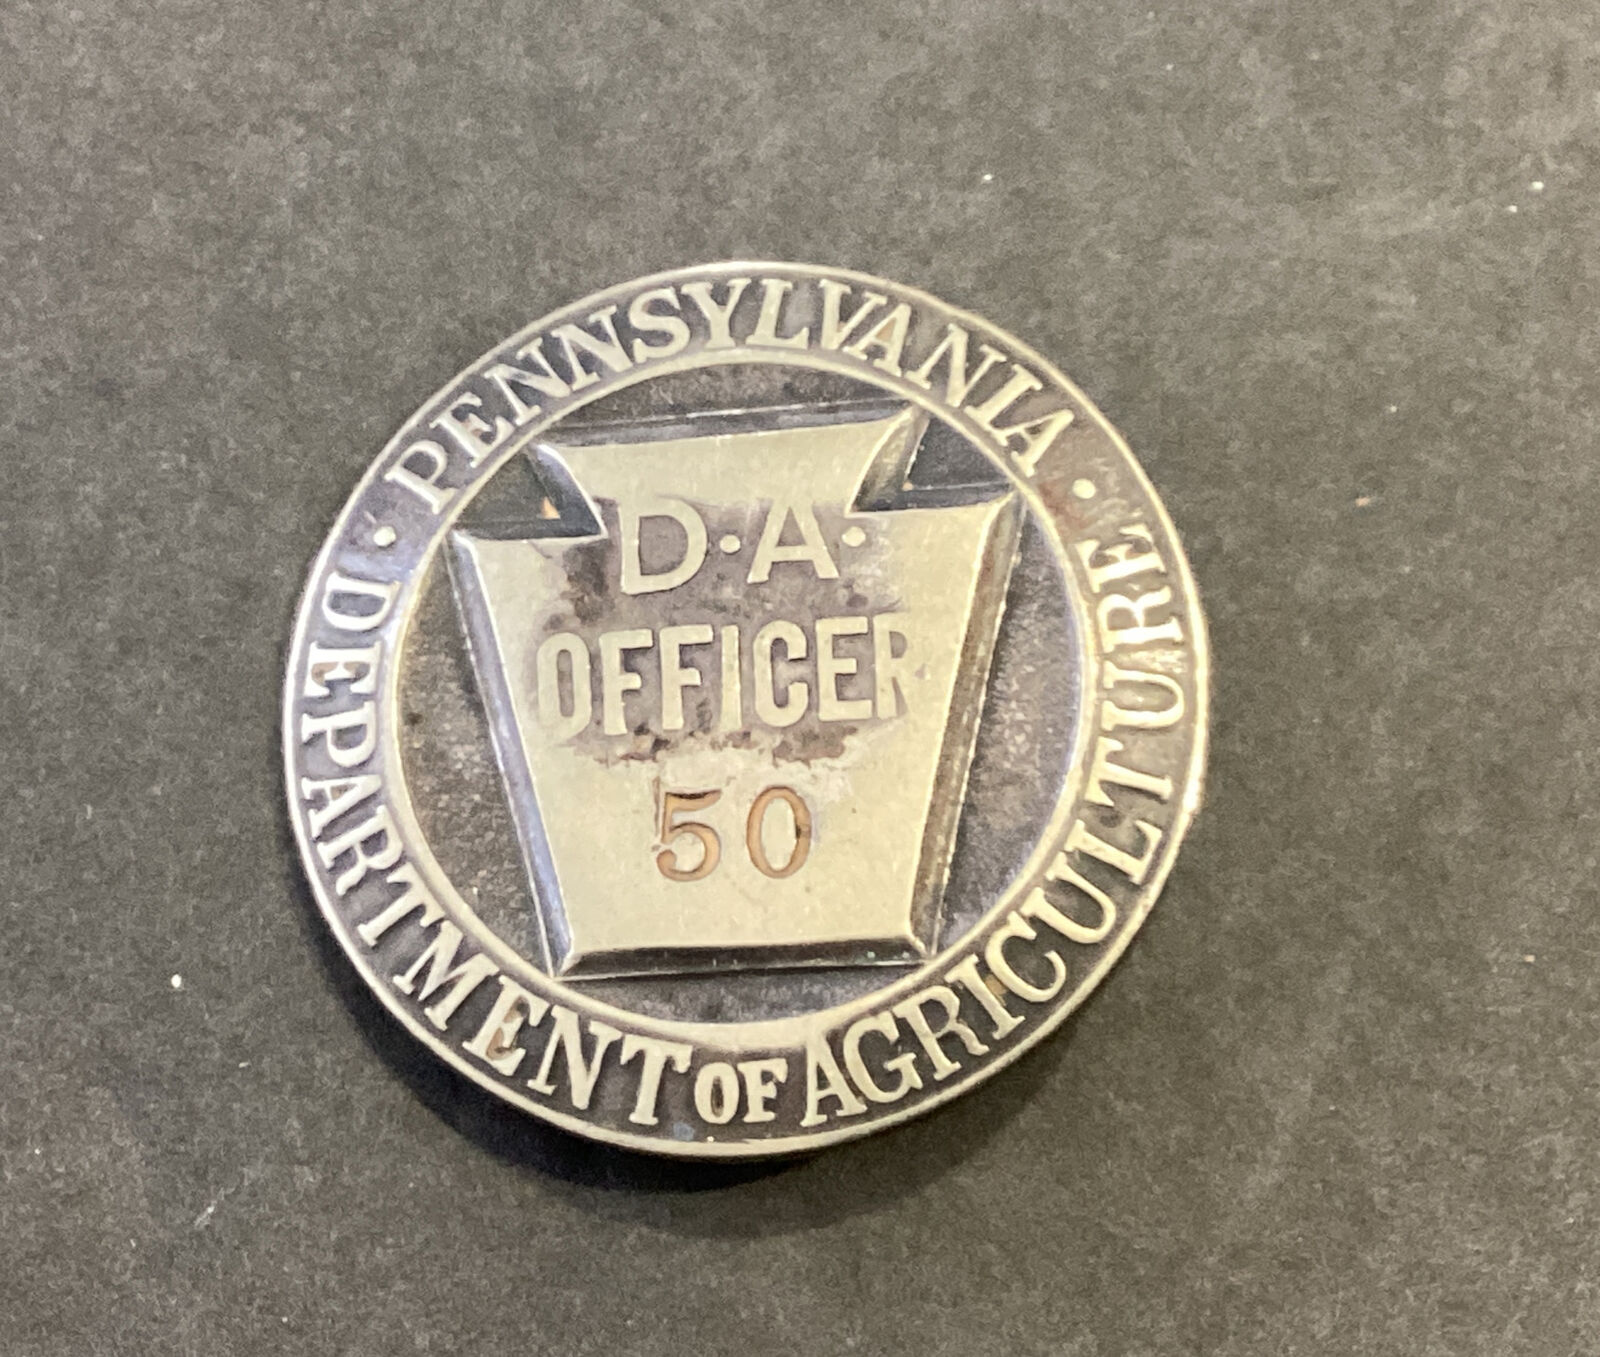 OBSOLETE 1930s Pennsylvania PA Department of Agriculture D.A. Officer Badge #50